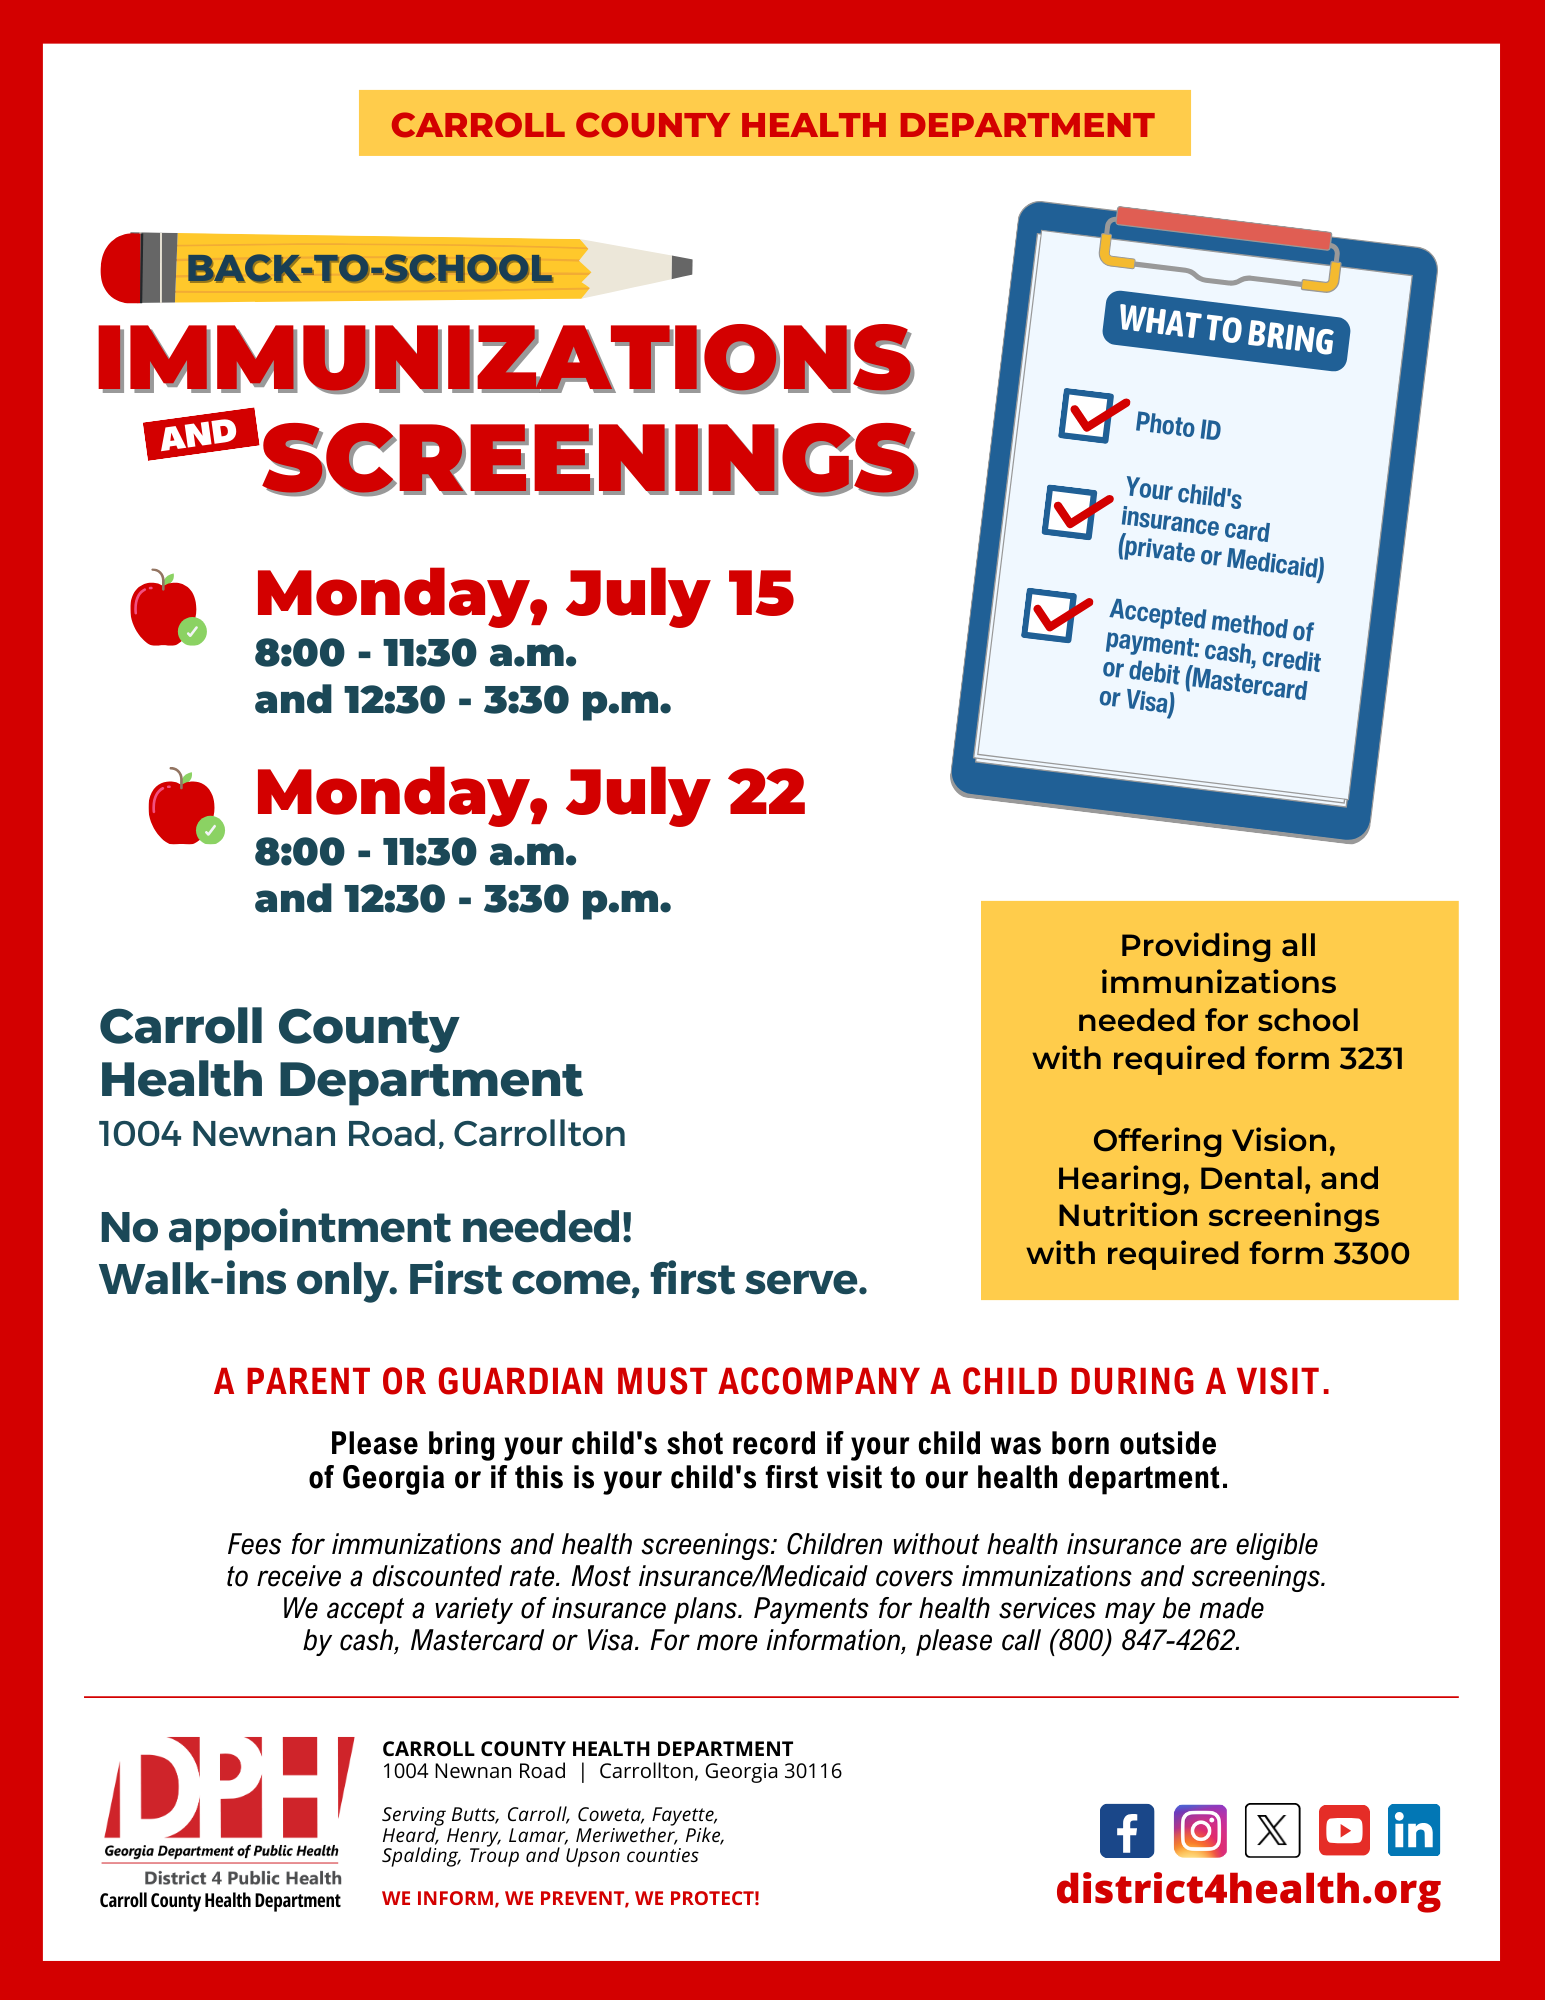 immunization opportunities for students